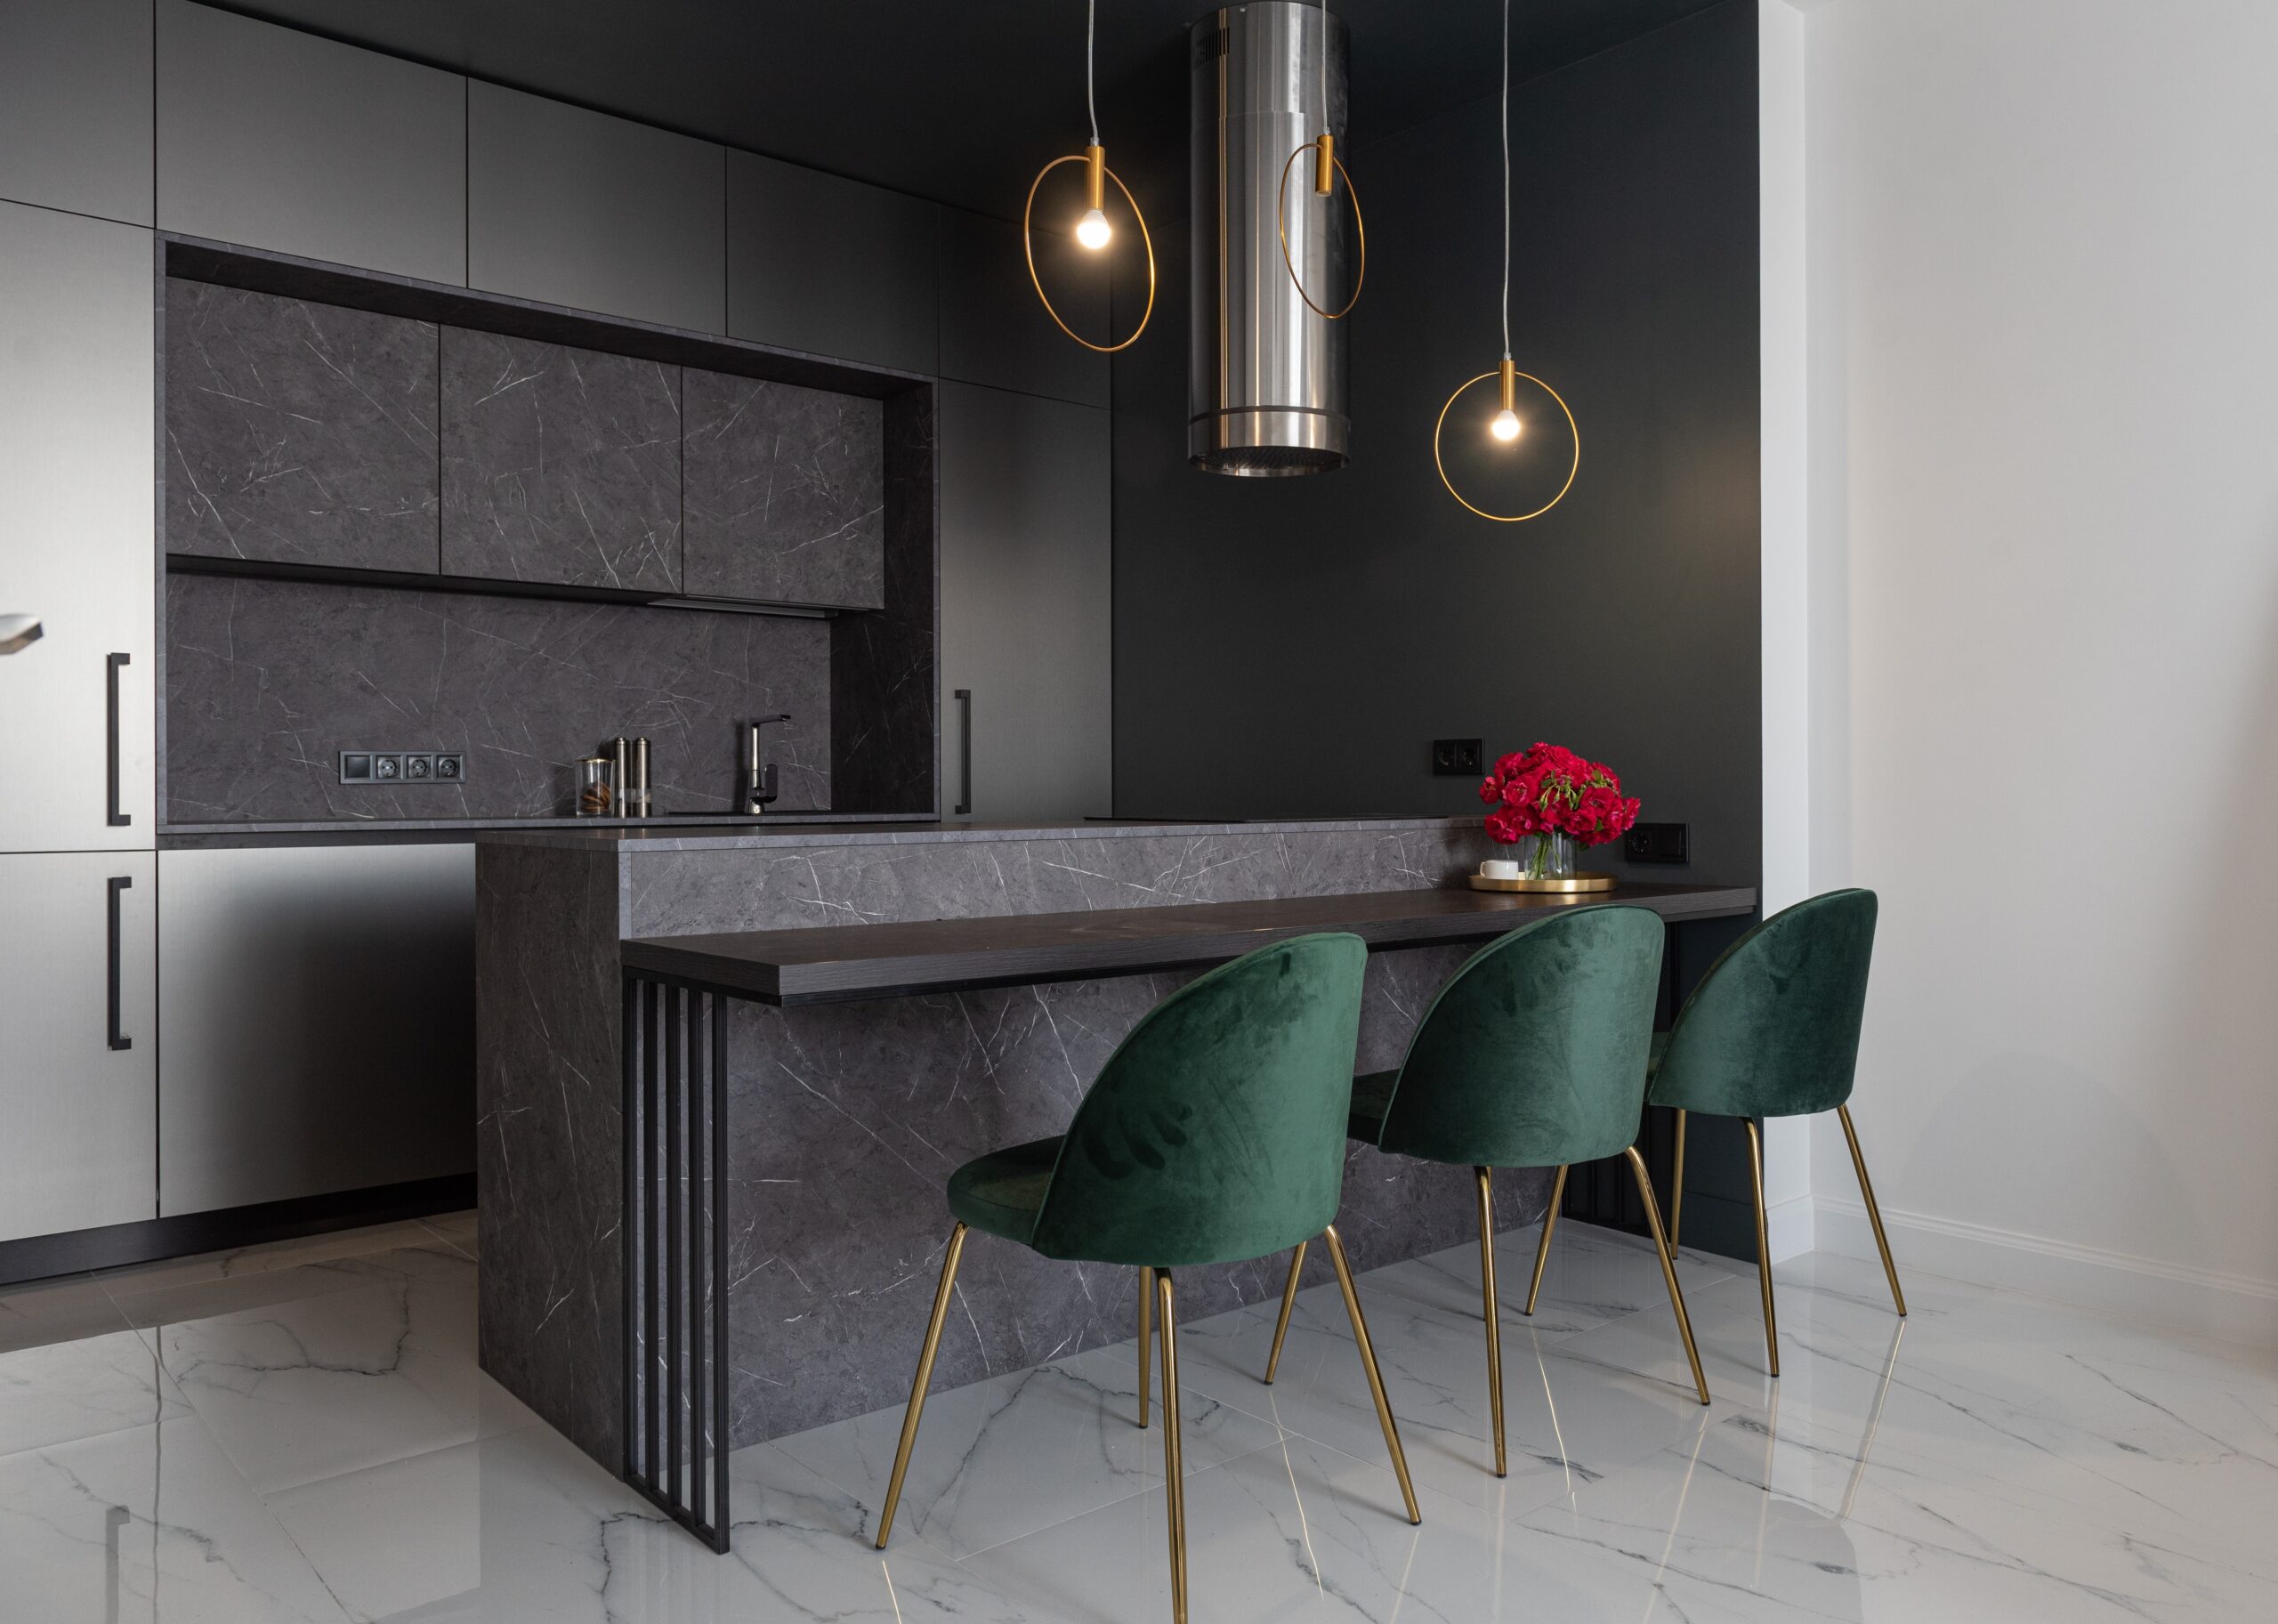 Dark forest green pairs well with matte black kitchen countertops. Pictured: Black kitchen countertops with green furniture with gold detailing.